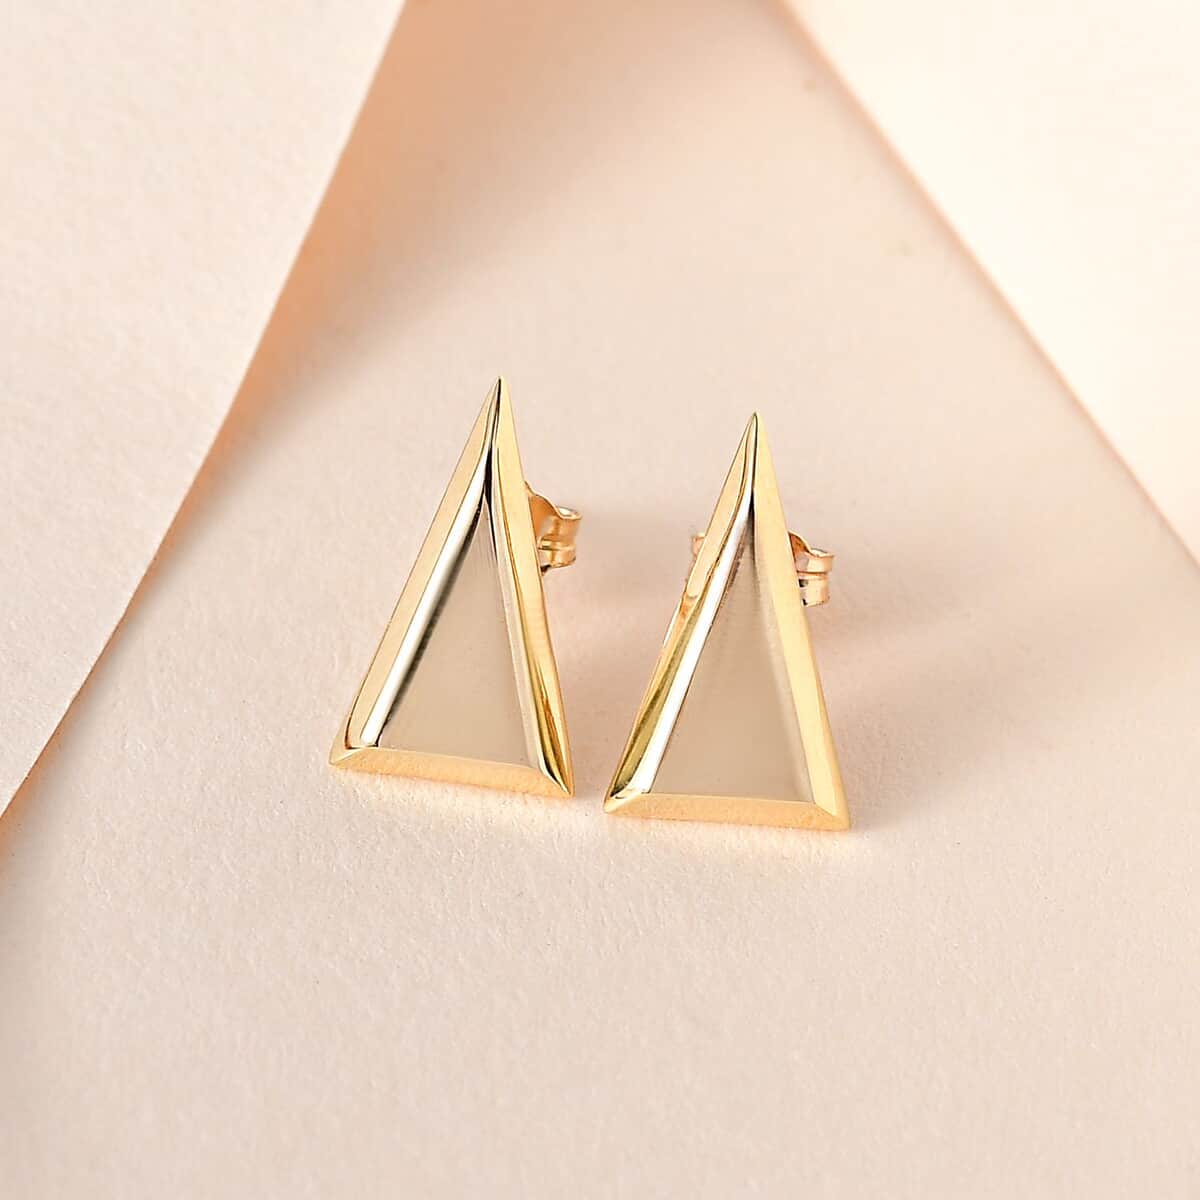 Luxoro 10K Yellow Gold Triangle Shape Stud Earrings 1.25 Grams image number 1